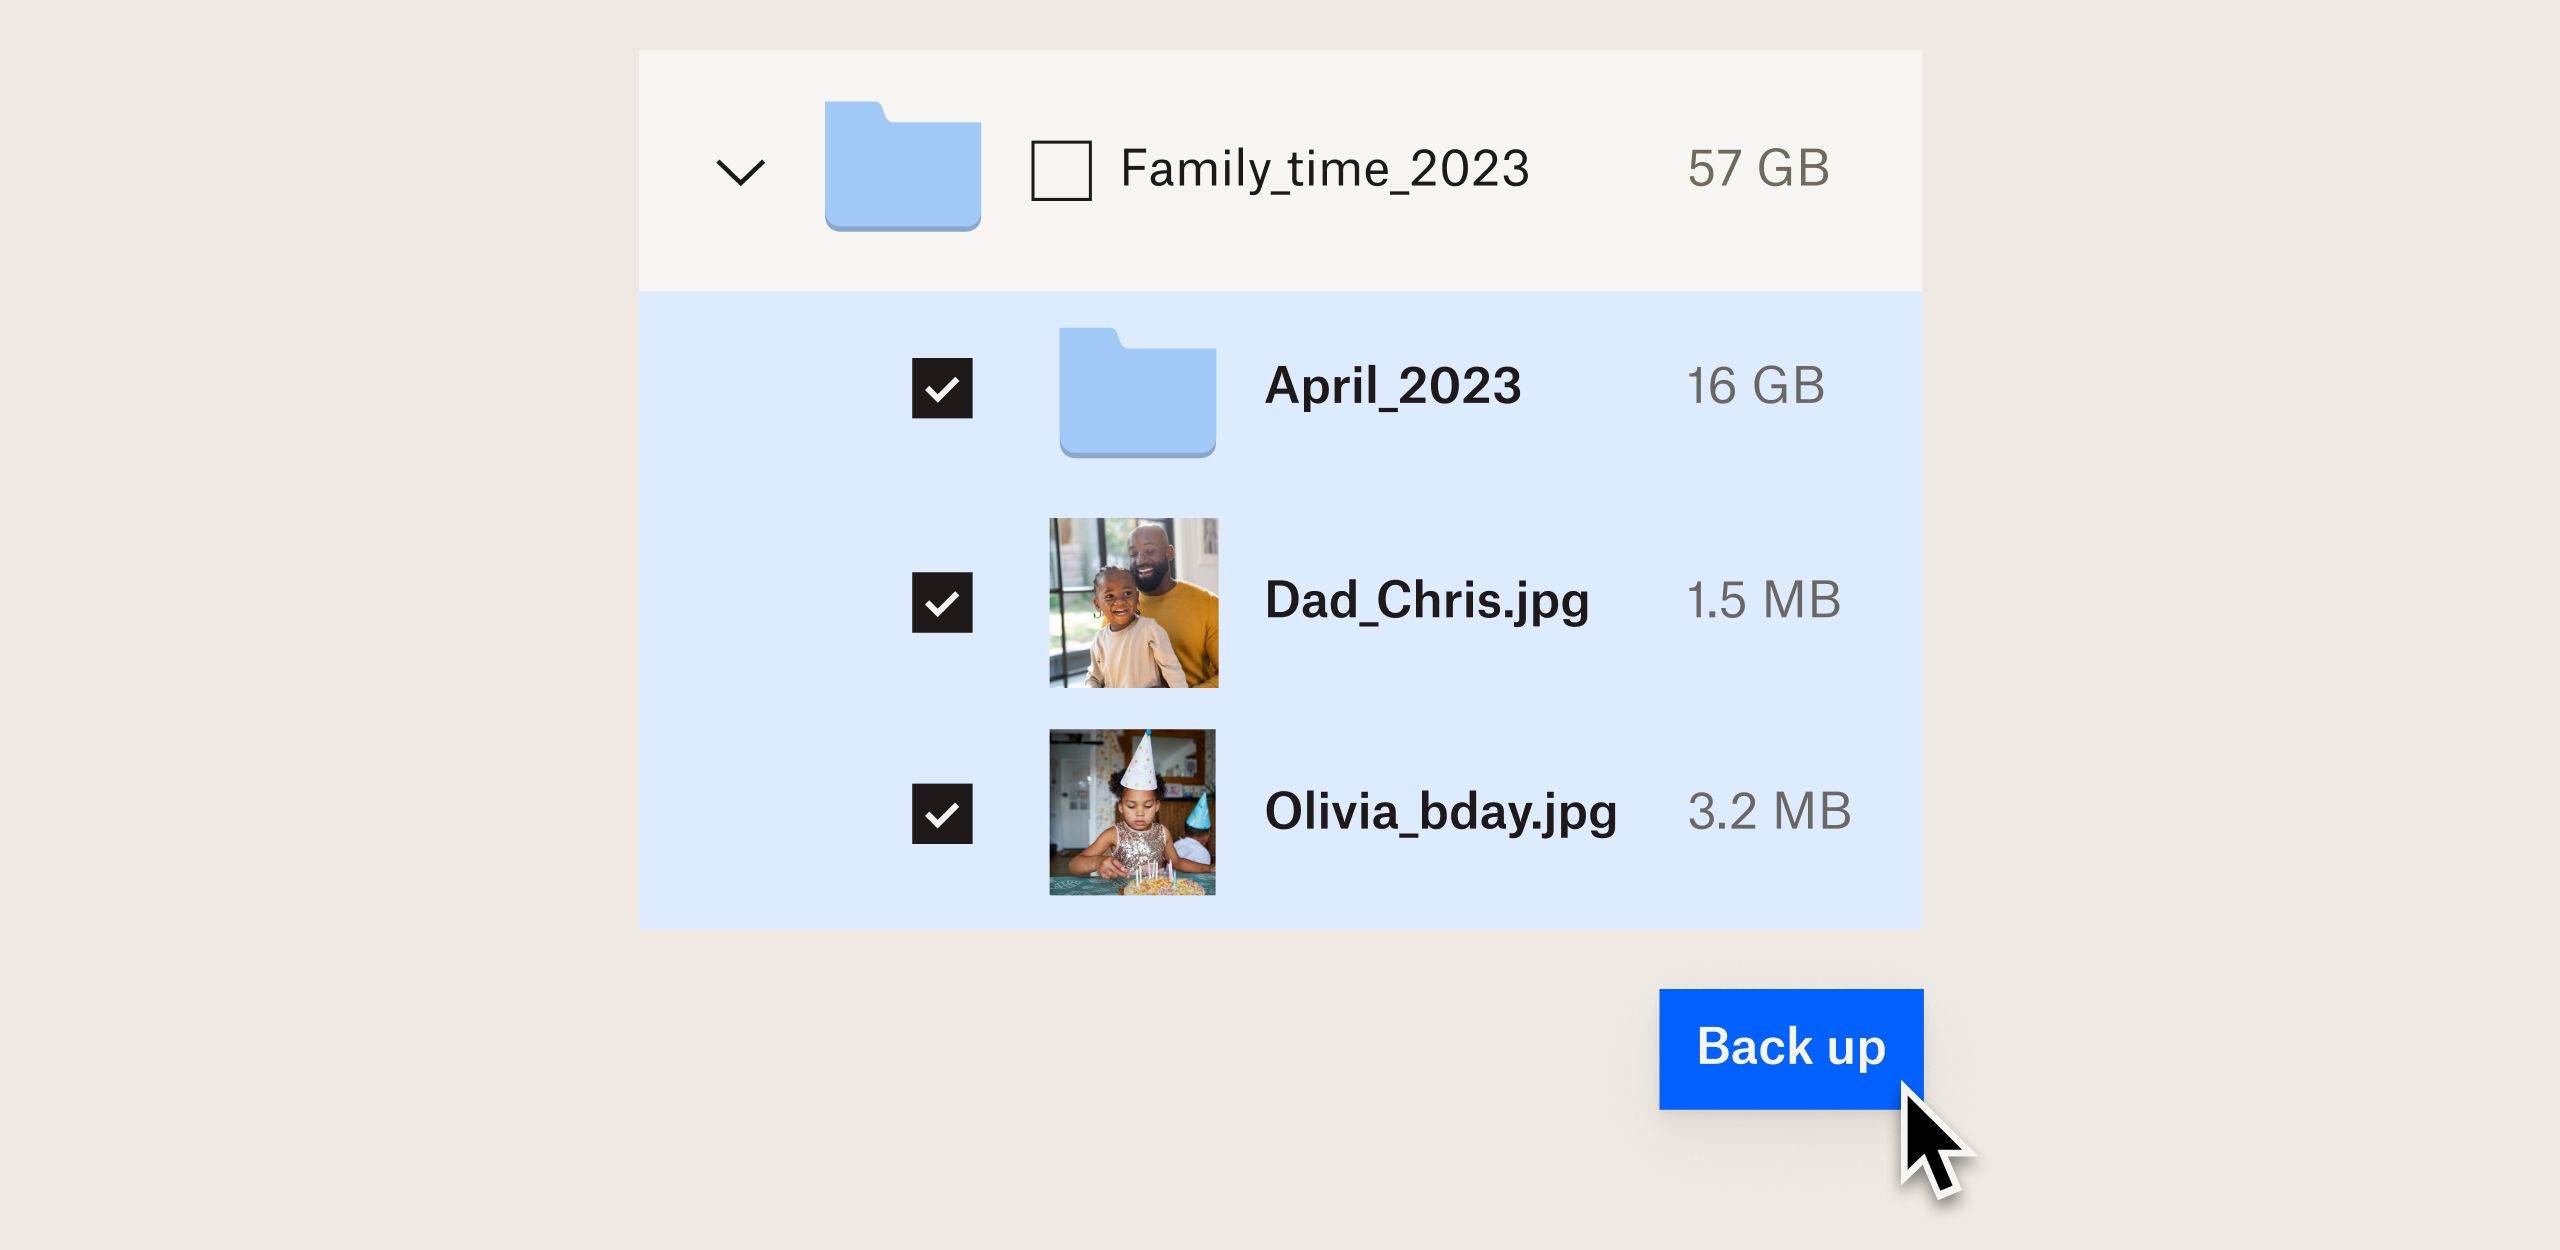 Product UI shows how to backup files in a folder